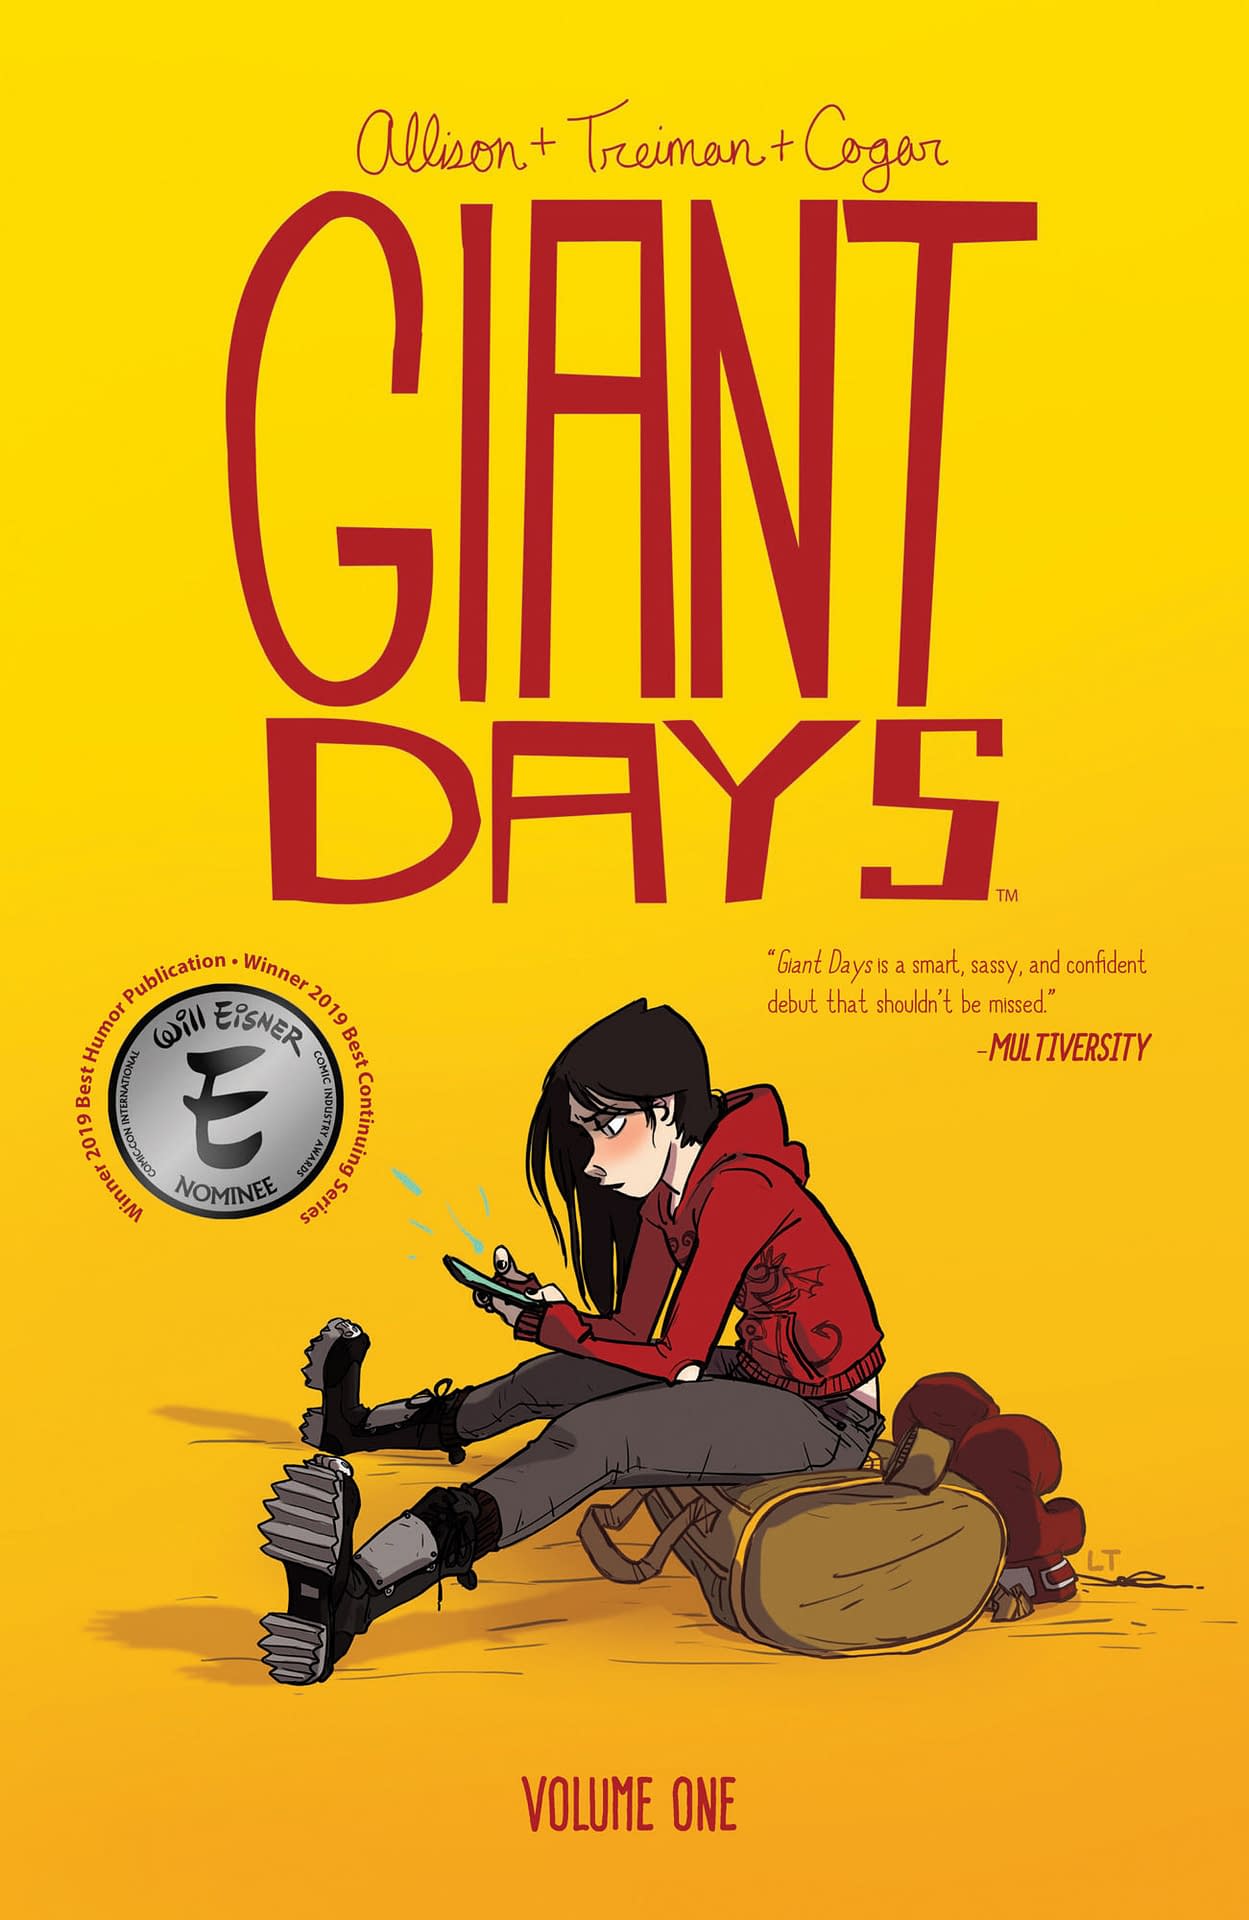 BOOM! to Publish 3-Volume The Quotable Giant Days in July